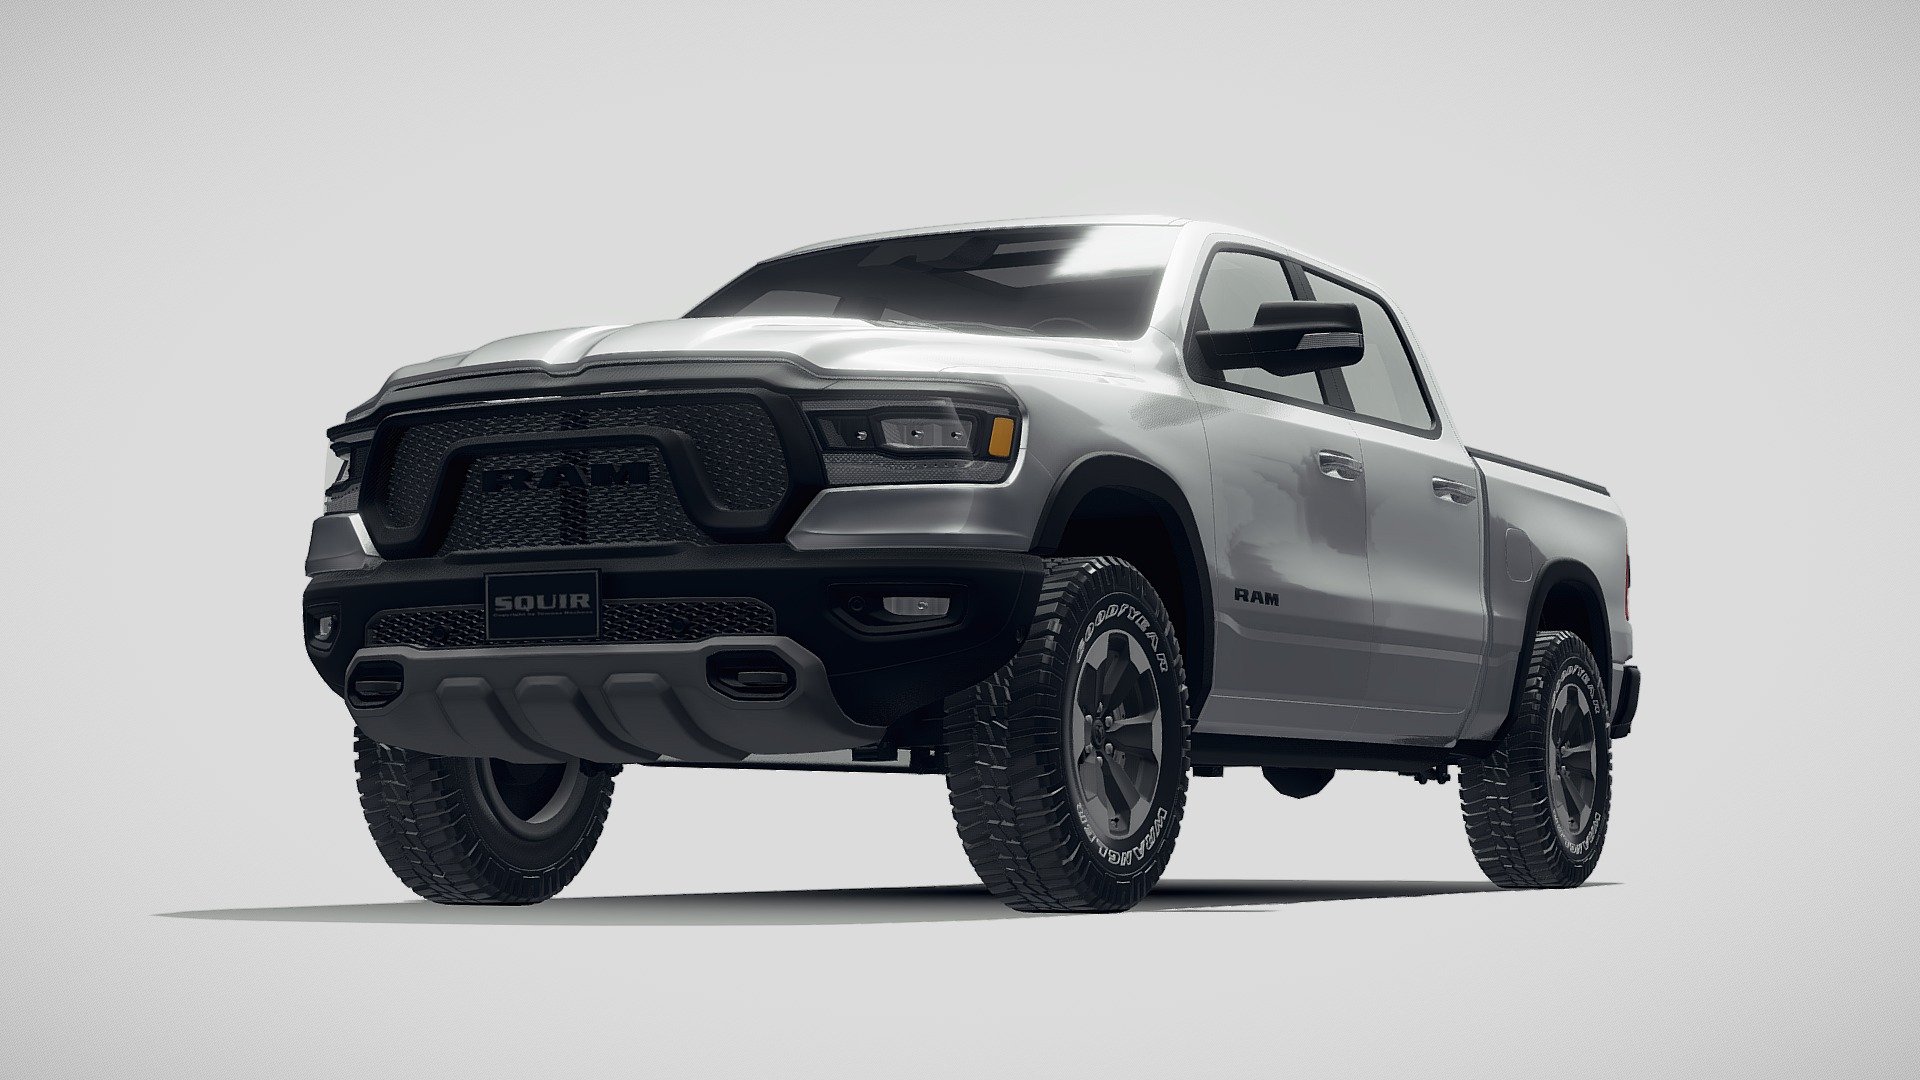 3D model RAM 1500 Rebel Crew Cab 2019 - This is a 3D model of the RAM 1500 Rebel Crew Cab 2019. The 3D model is about a silver suv with a white background.